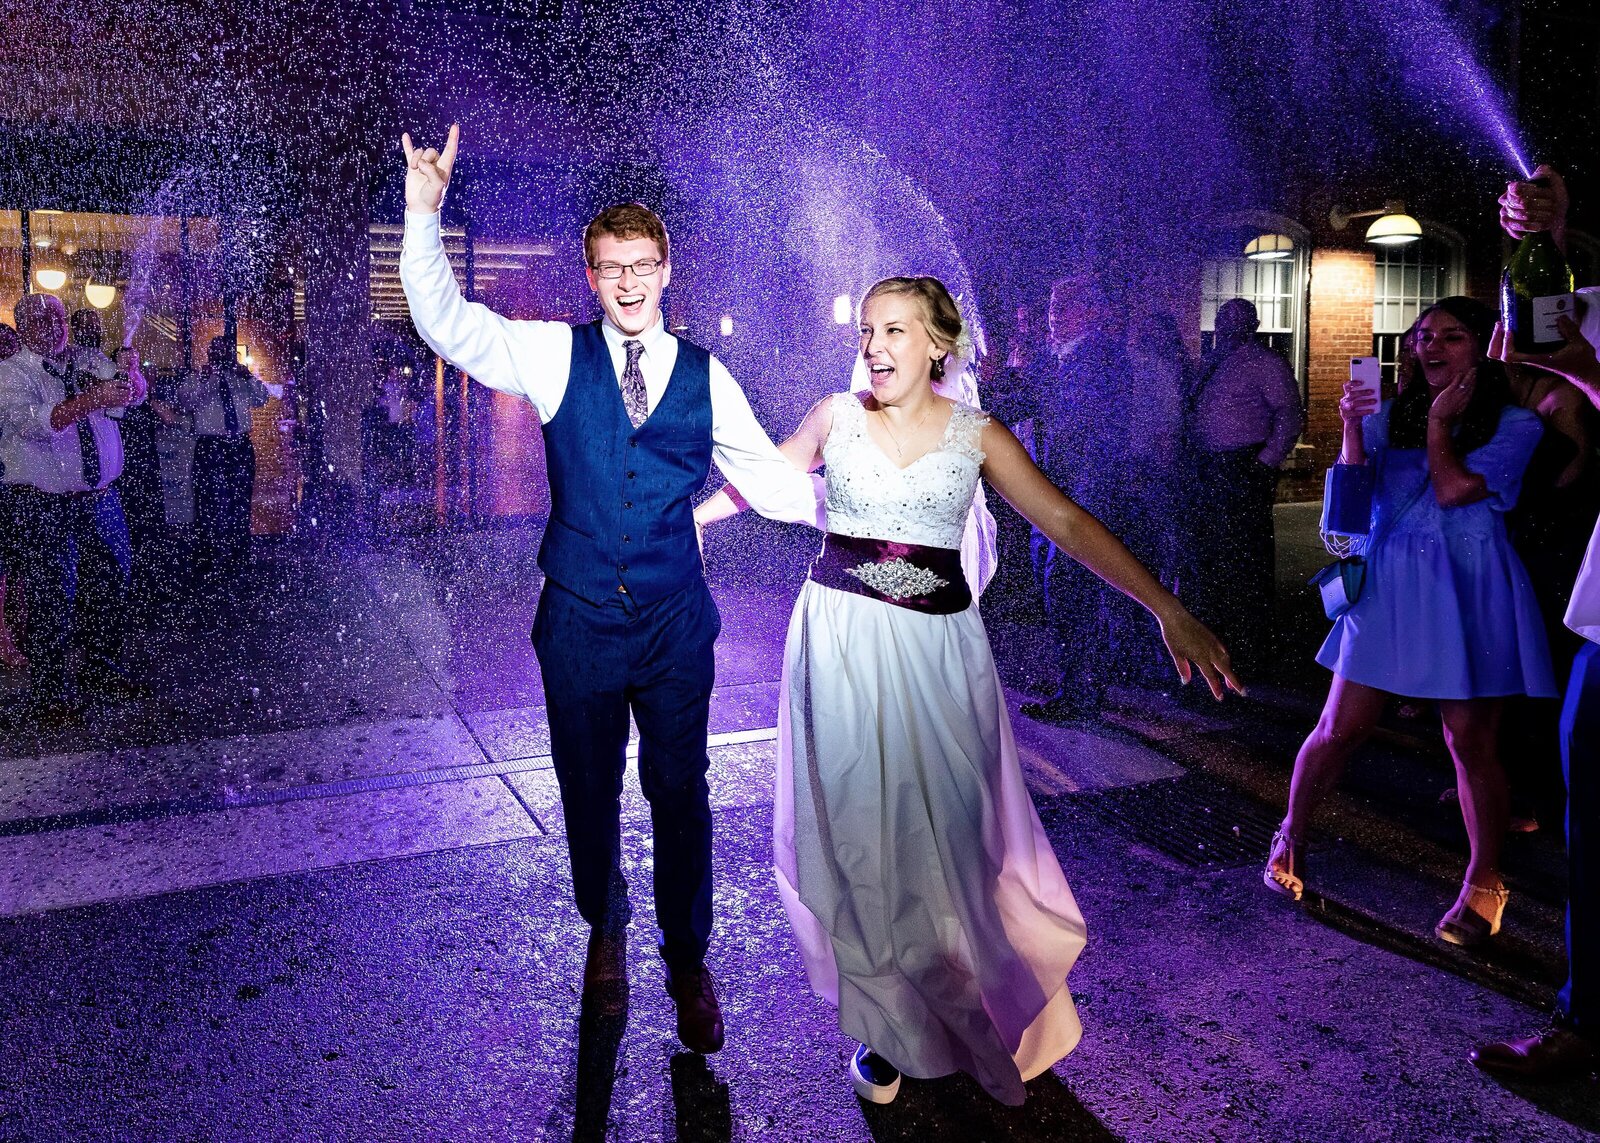 newlyweds exit their wedding reception amidst champagne spray. they are backlit with purple lighting